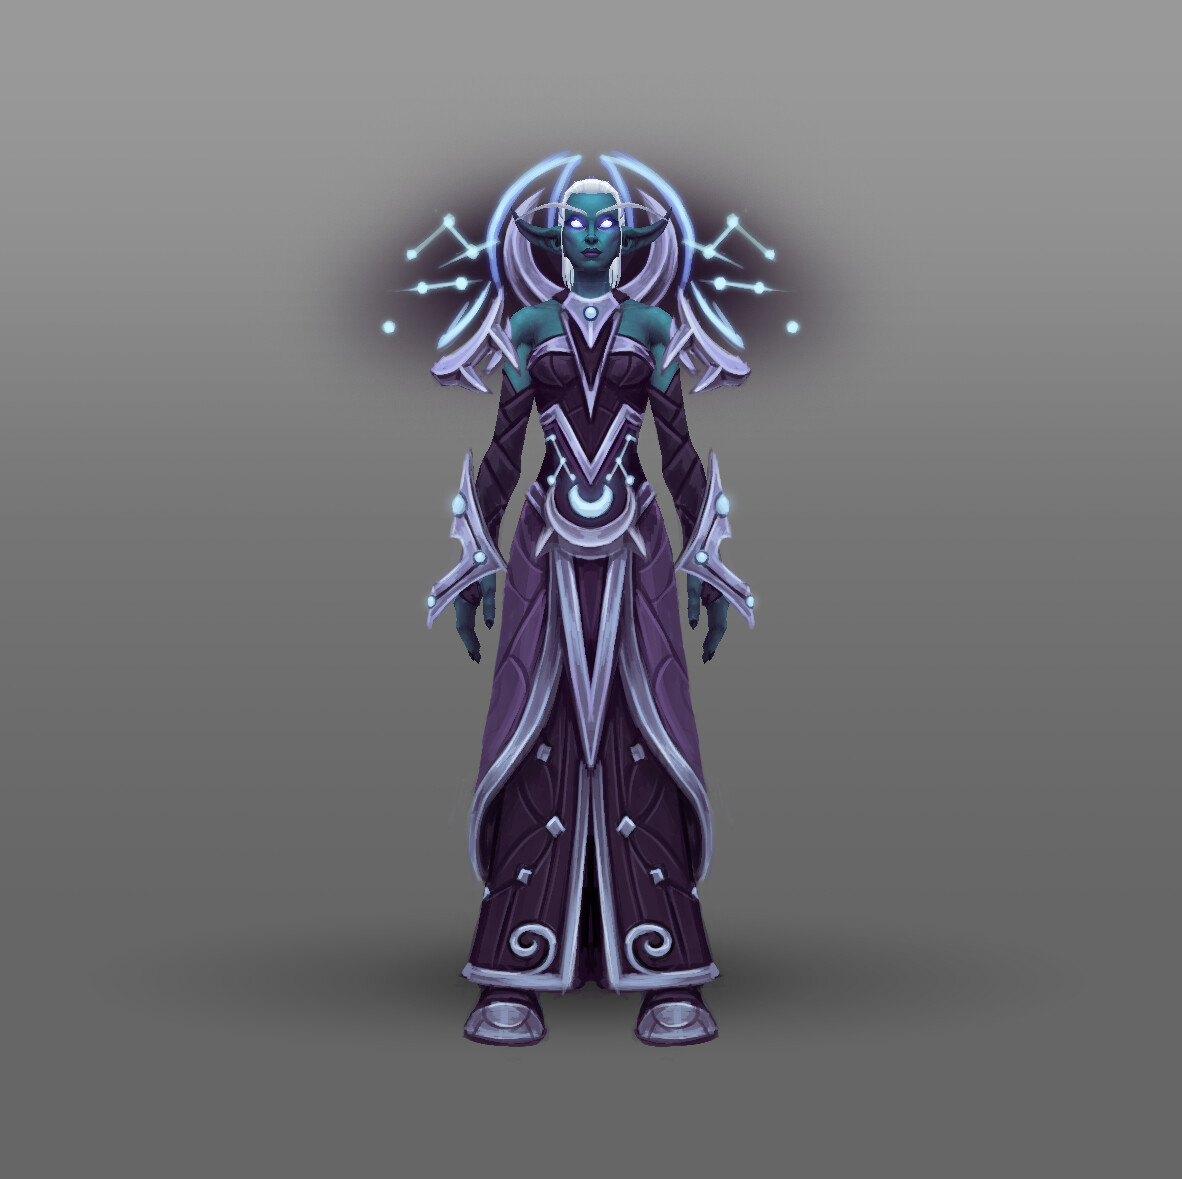 Priest
Based on Star Augur Etraeus. While he isn't a priest, I felt the design would be a good and distinct fit nonetheless. 